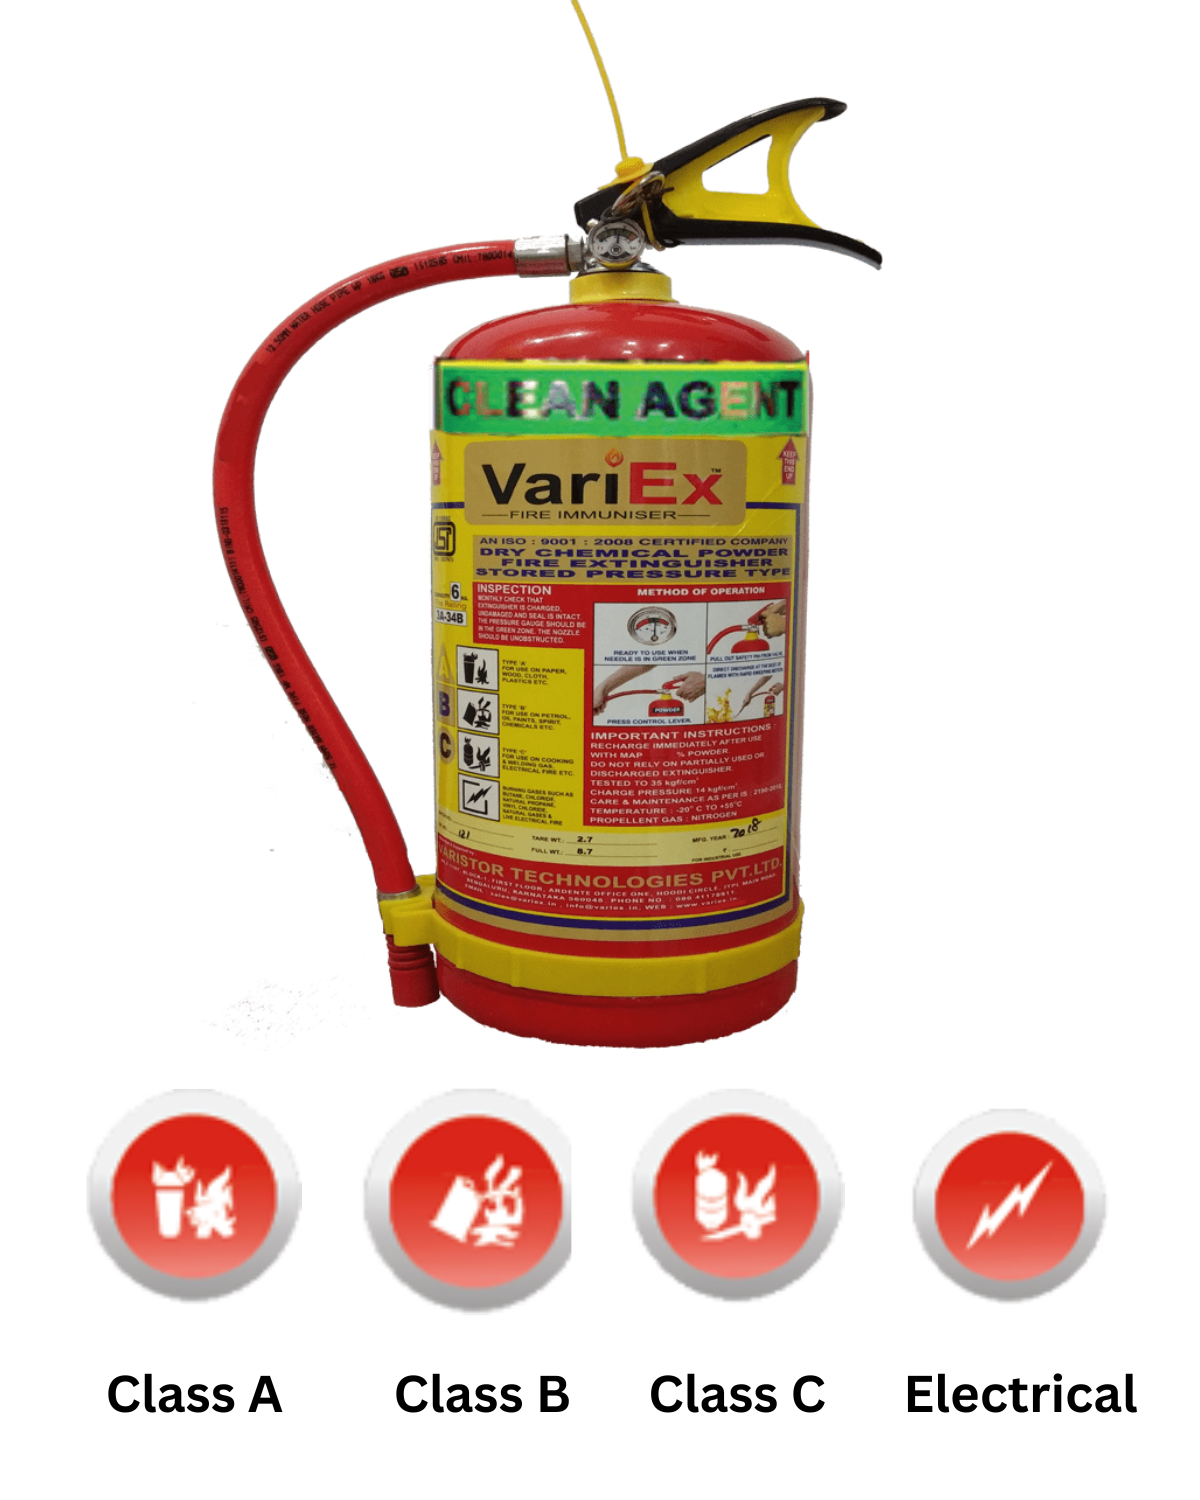 Clean agent fire extinguihsers